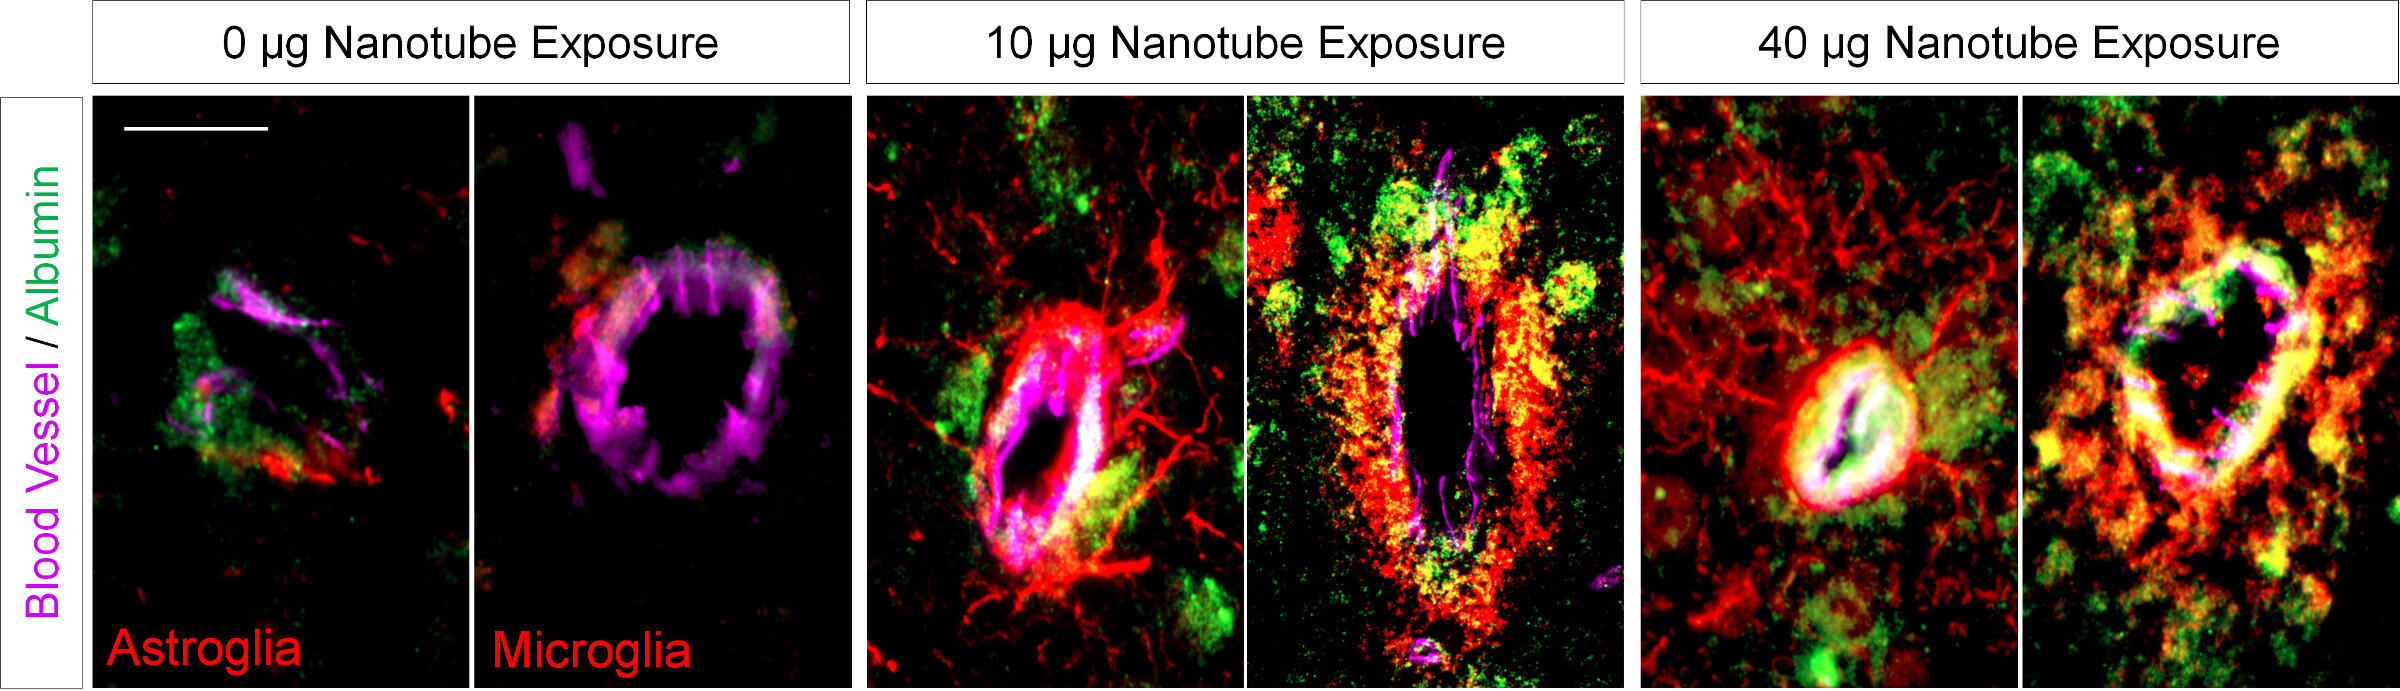 Pictured is the induced leakage of the blood-brain barrier and the consequential neuroinflammatory activation of the glial cells in brains exposed to varying amounts — from 0 to 40 micrograms (µg) — of nanotubes released into the lungs. Serum albumin (green) is shown having leaked from the blood vessels (purple) into the brain. At top, astroglia (red) react by forming a scar-like barrier around the leaking vessel, controlling further leakage. At bottom, microglia (red) — a hallmark of neuroinflammation — are also activated and recruited to the leaking vessels where they are cleaning up the leaked albumin. As the nanotube exposure is increased, more albumin leaks and a greater number of glial cells become active, extending further out from the vessel and impacting more brain tissue.  